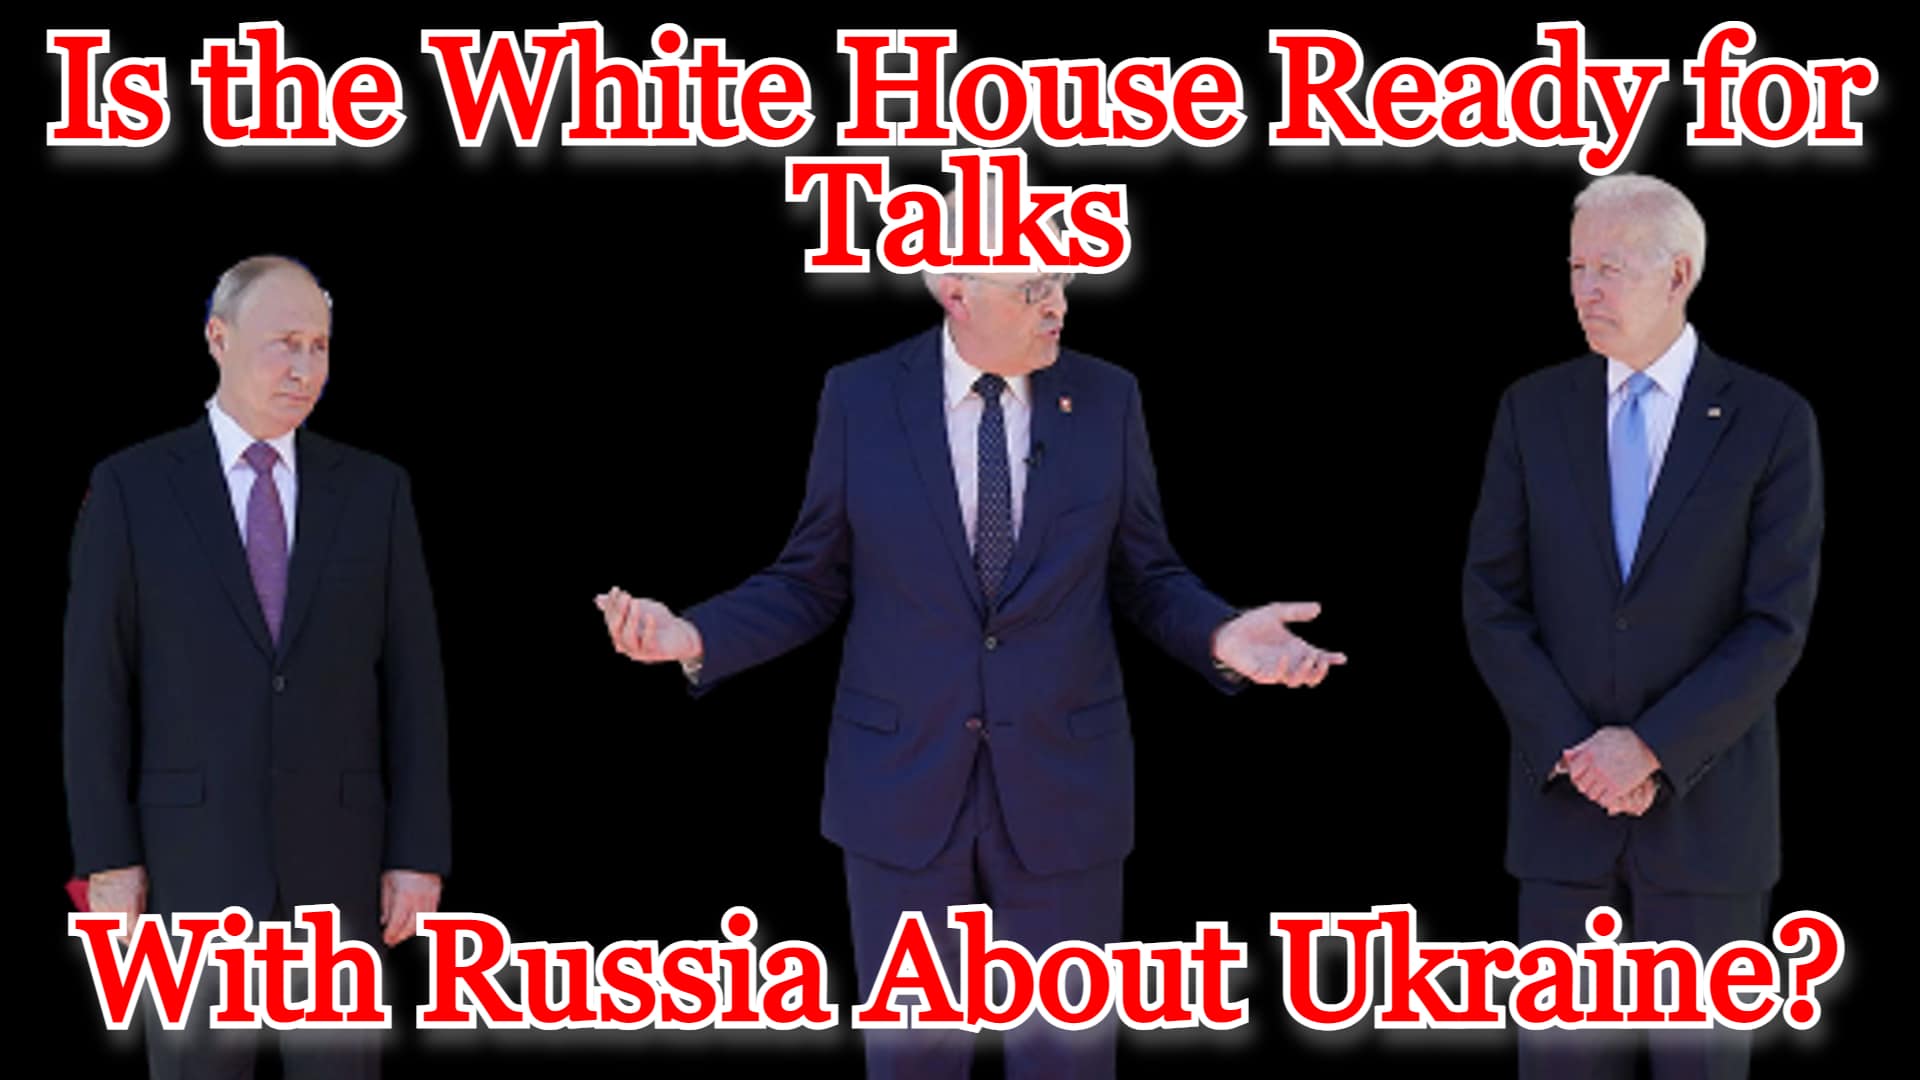 COI #348: Is the White House Ready for Talks with Russia About Ukraine?